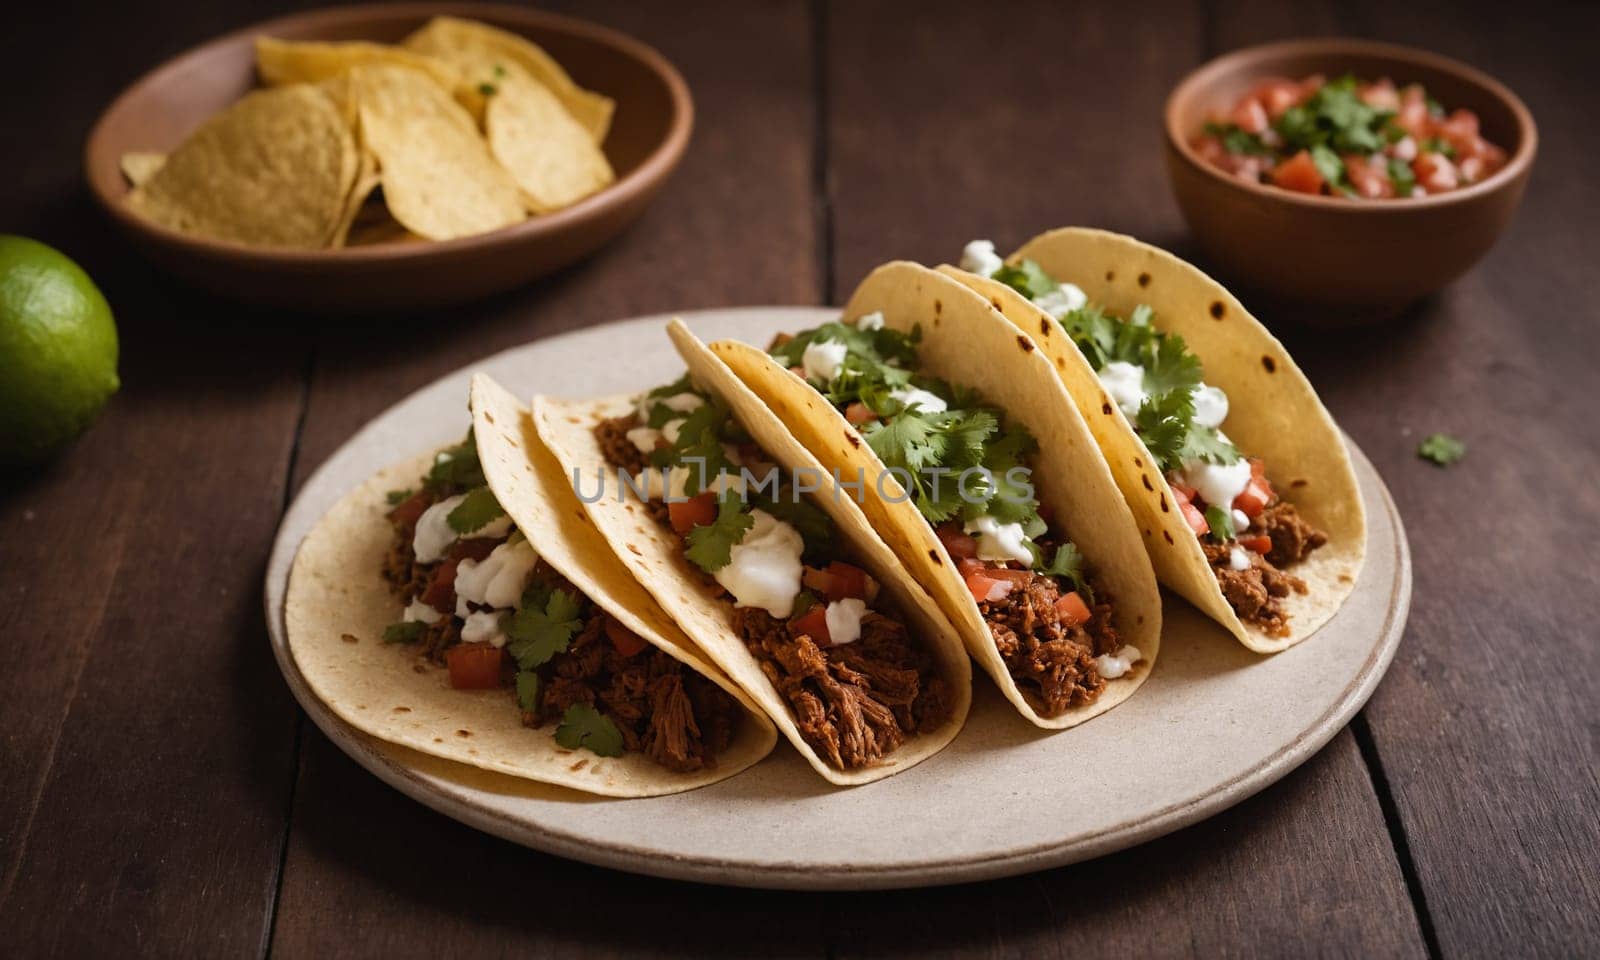 Vibrant photo of Mexican tacos with tender meat, fresh salsa, cilantro, and lime slices, served in crispy tortilla shells